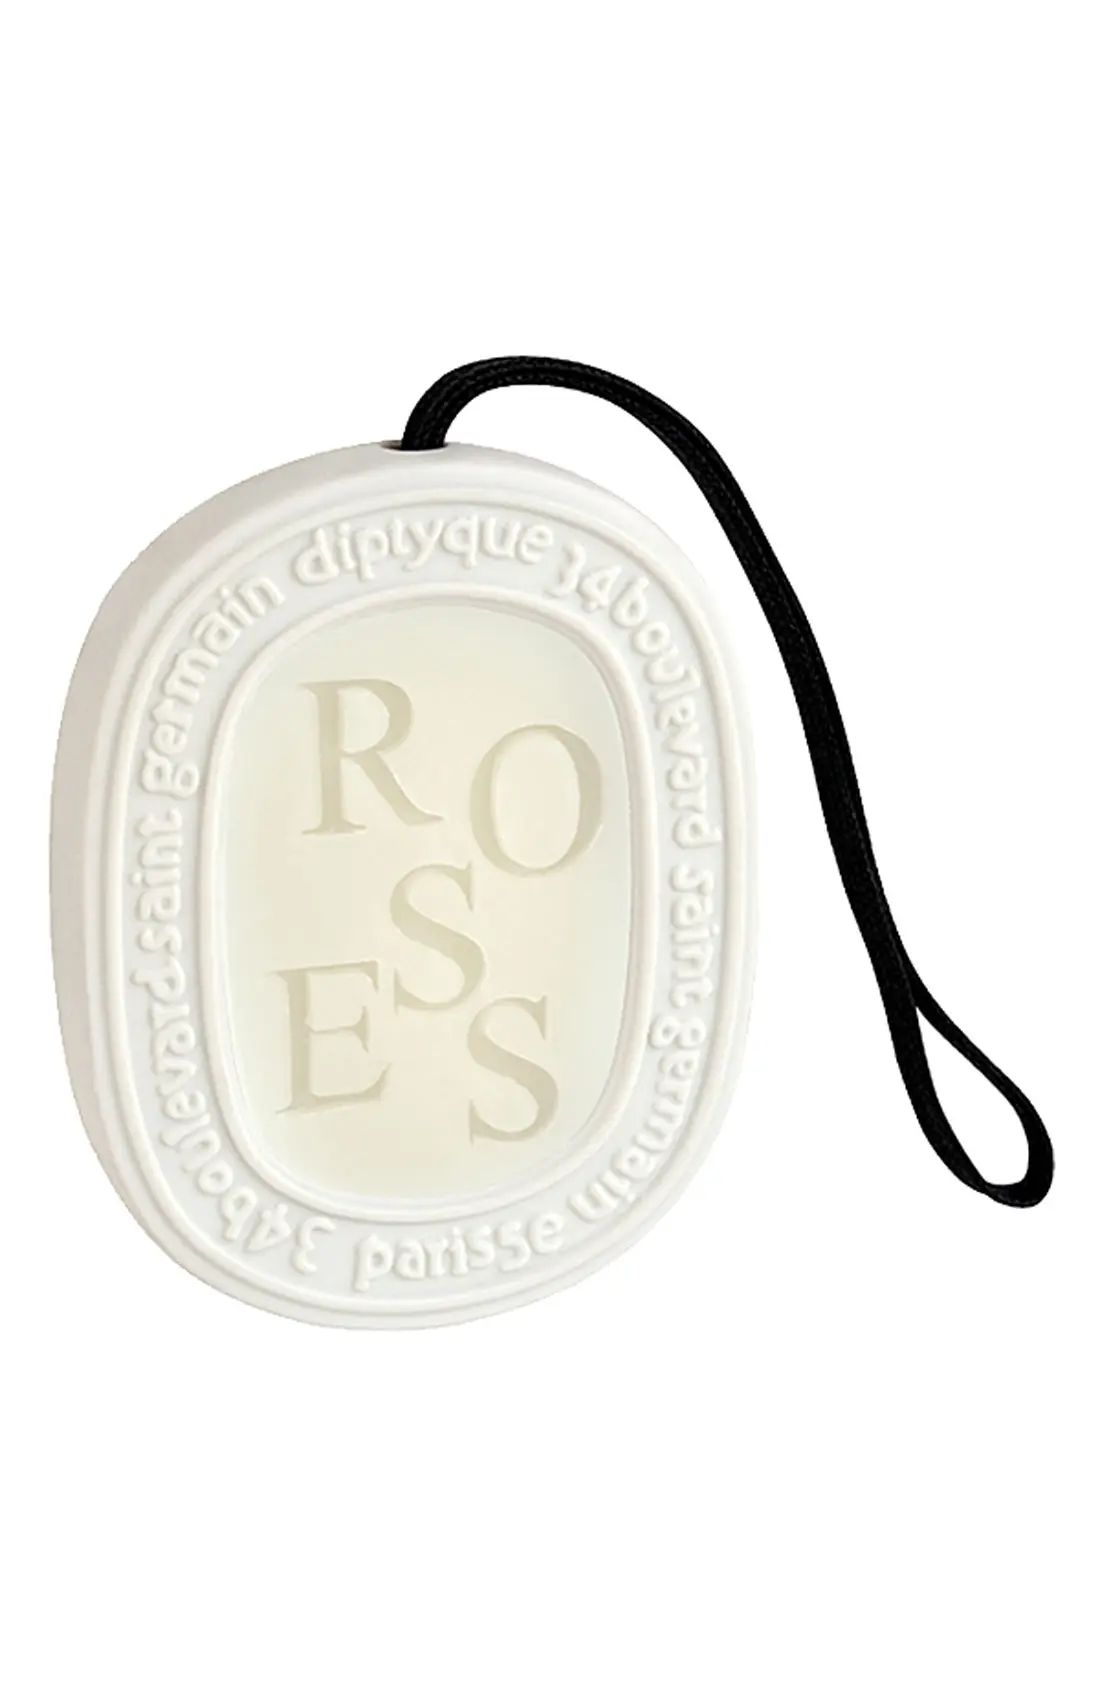 Diptyque 'Roses' Scented Oval, Size One Size - None | Nordstrom